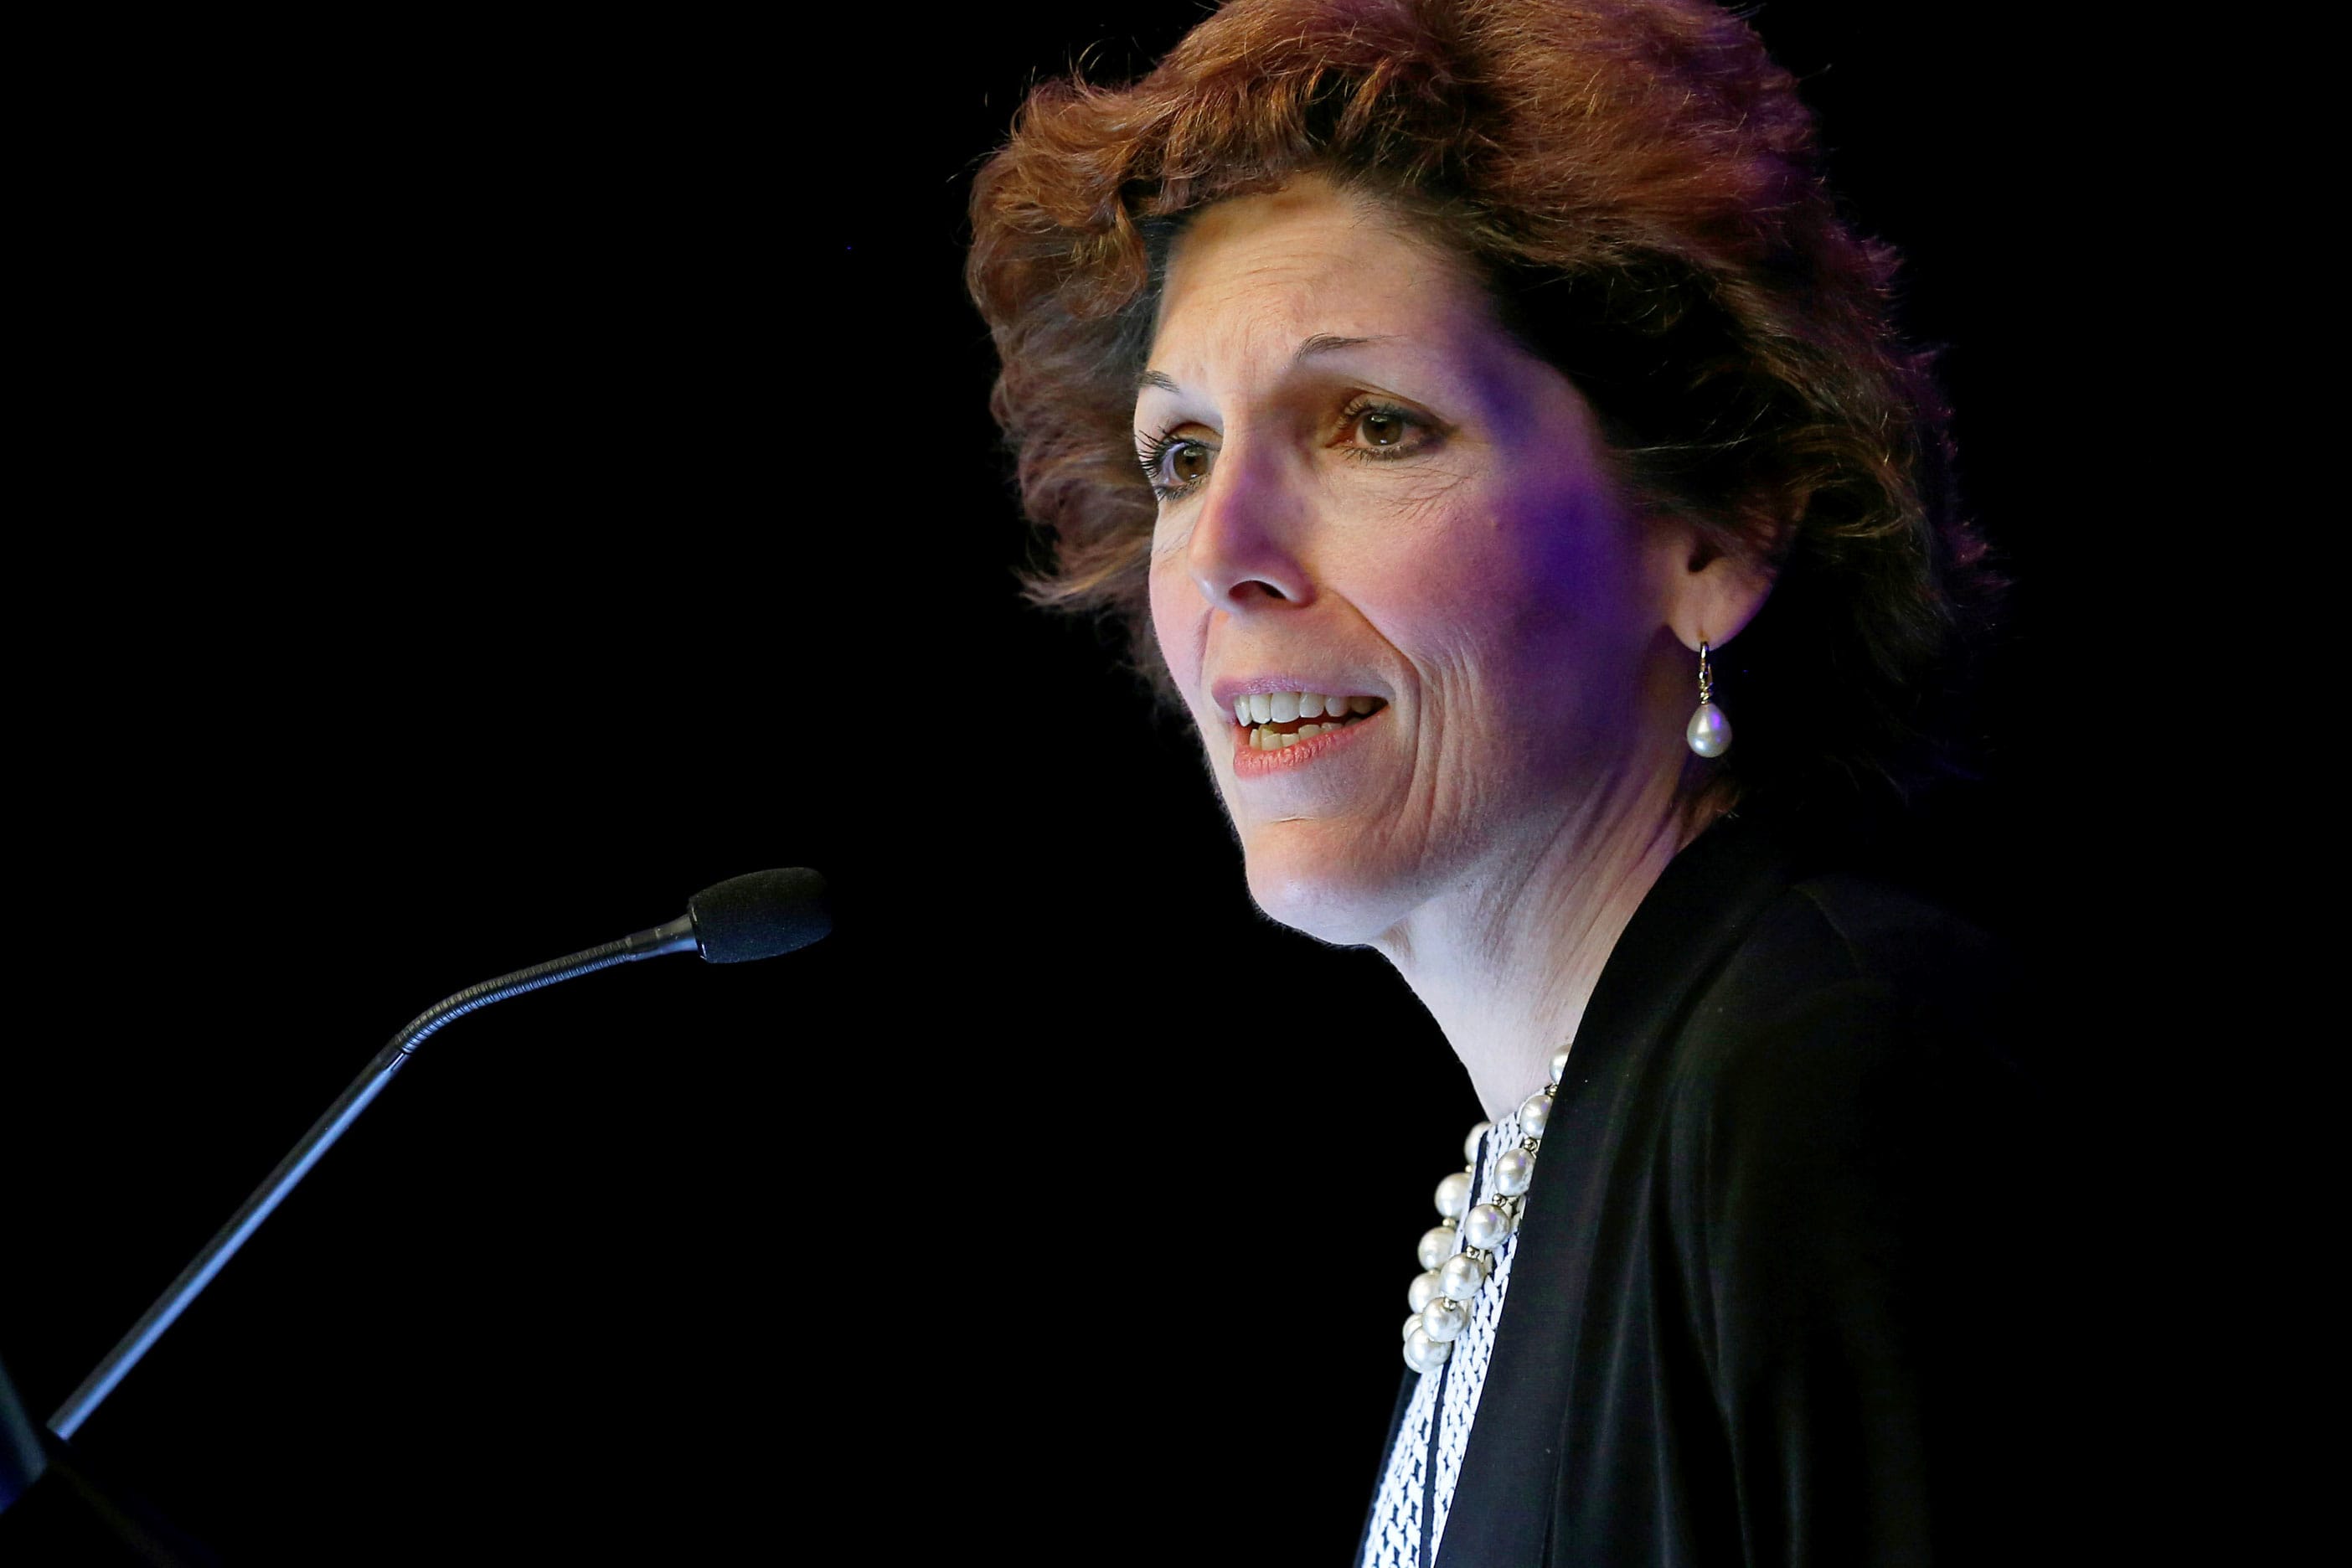 Fed’s Mester says ‘each meeting is going to be in play’ for rate hikes this year